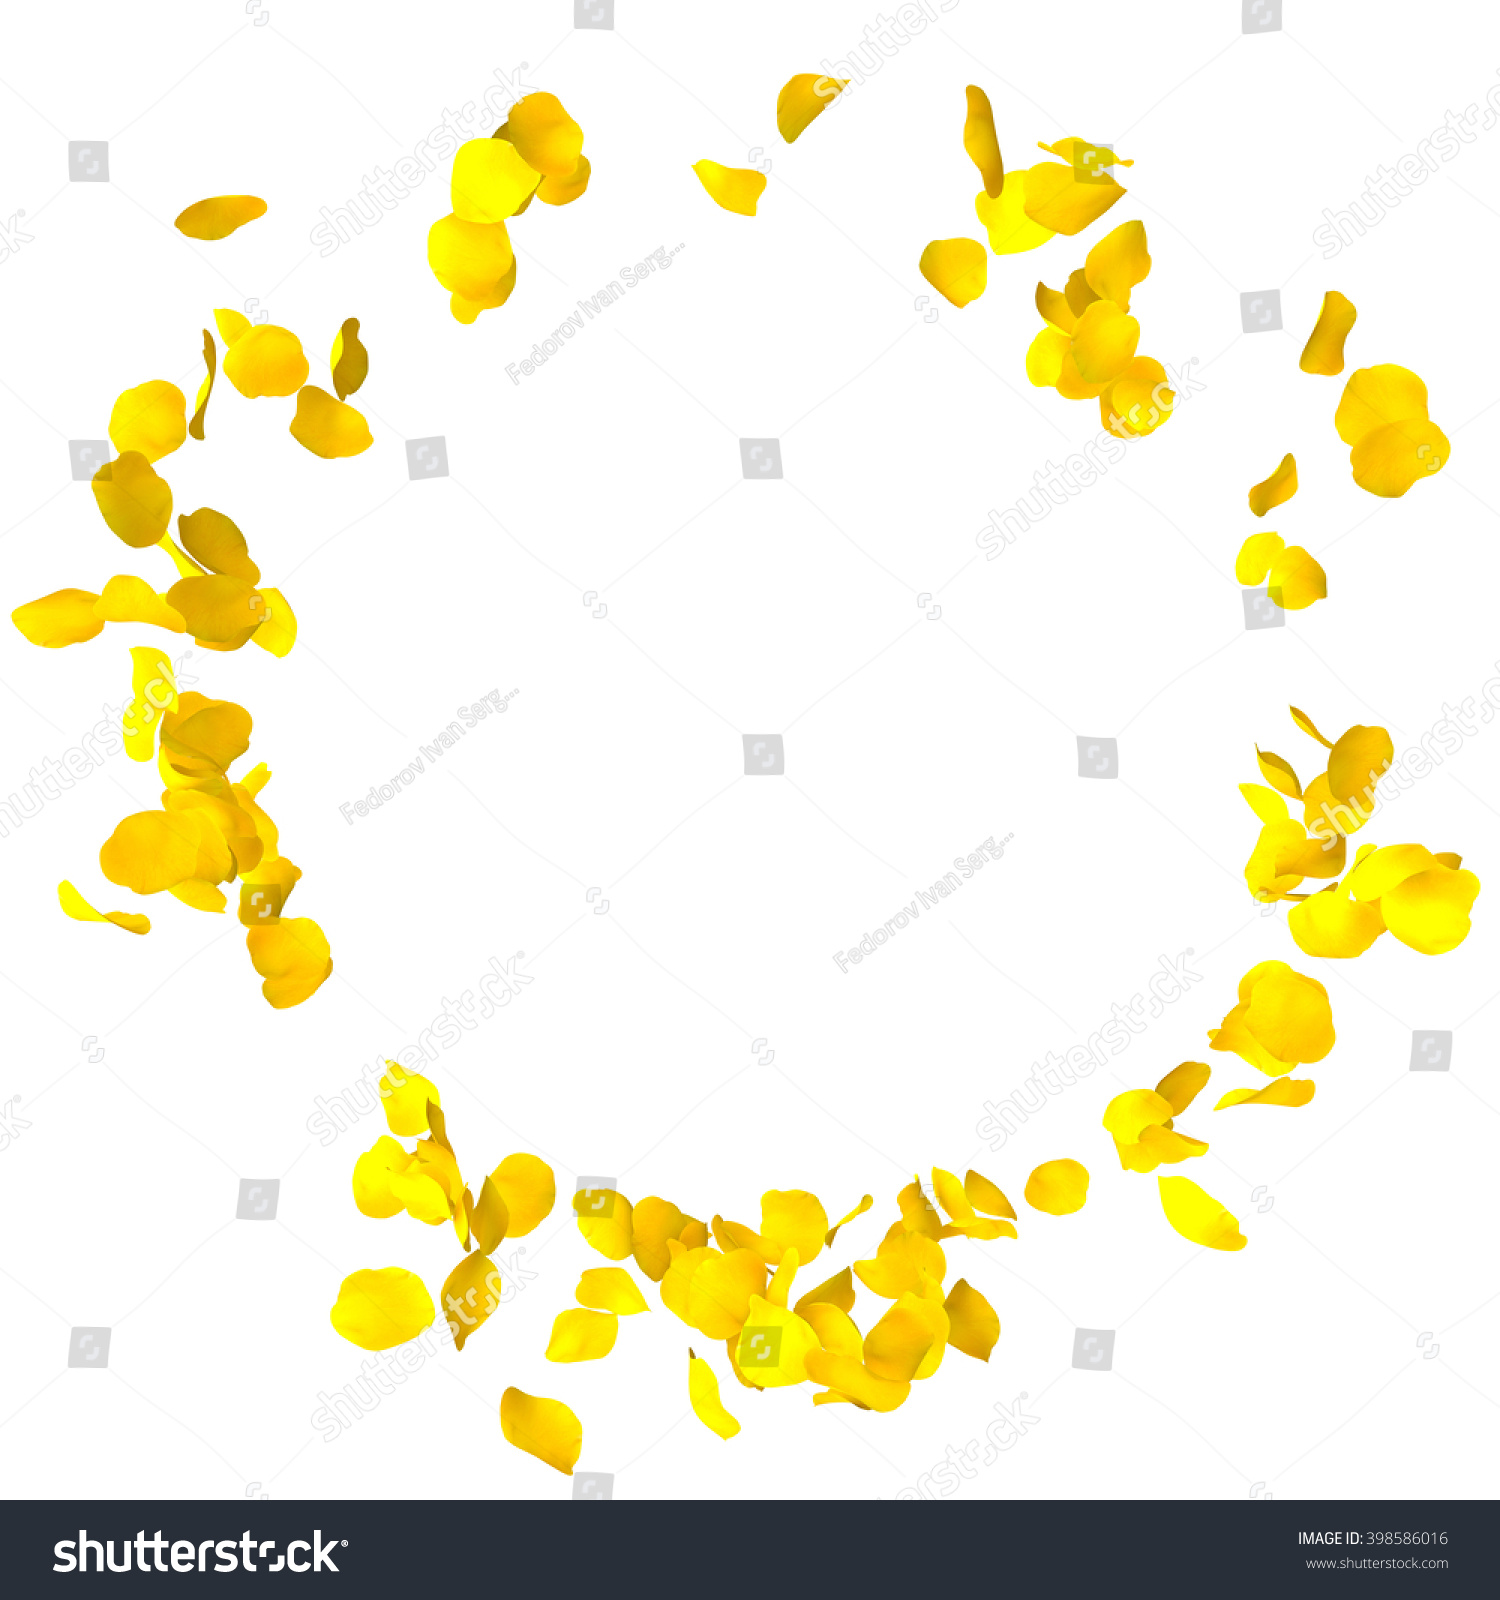 Petals yellow roses are flying in a circle on isolated white background. There is a place for Your text or photo #398586016